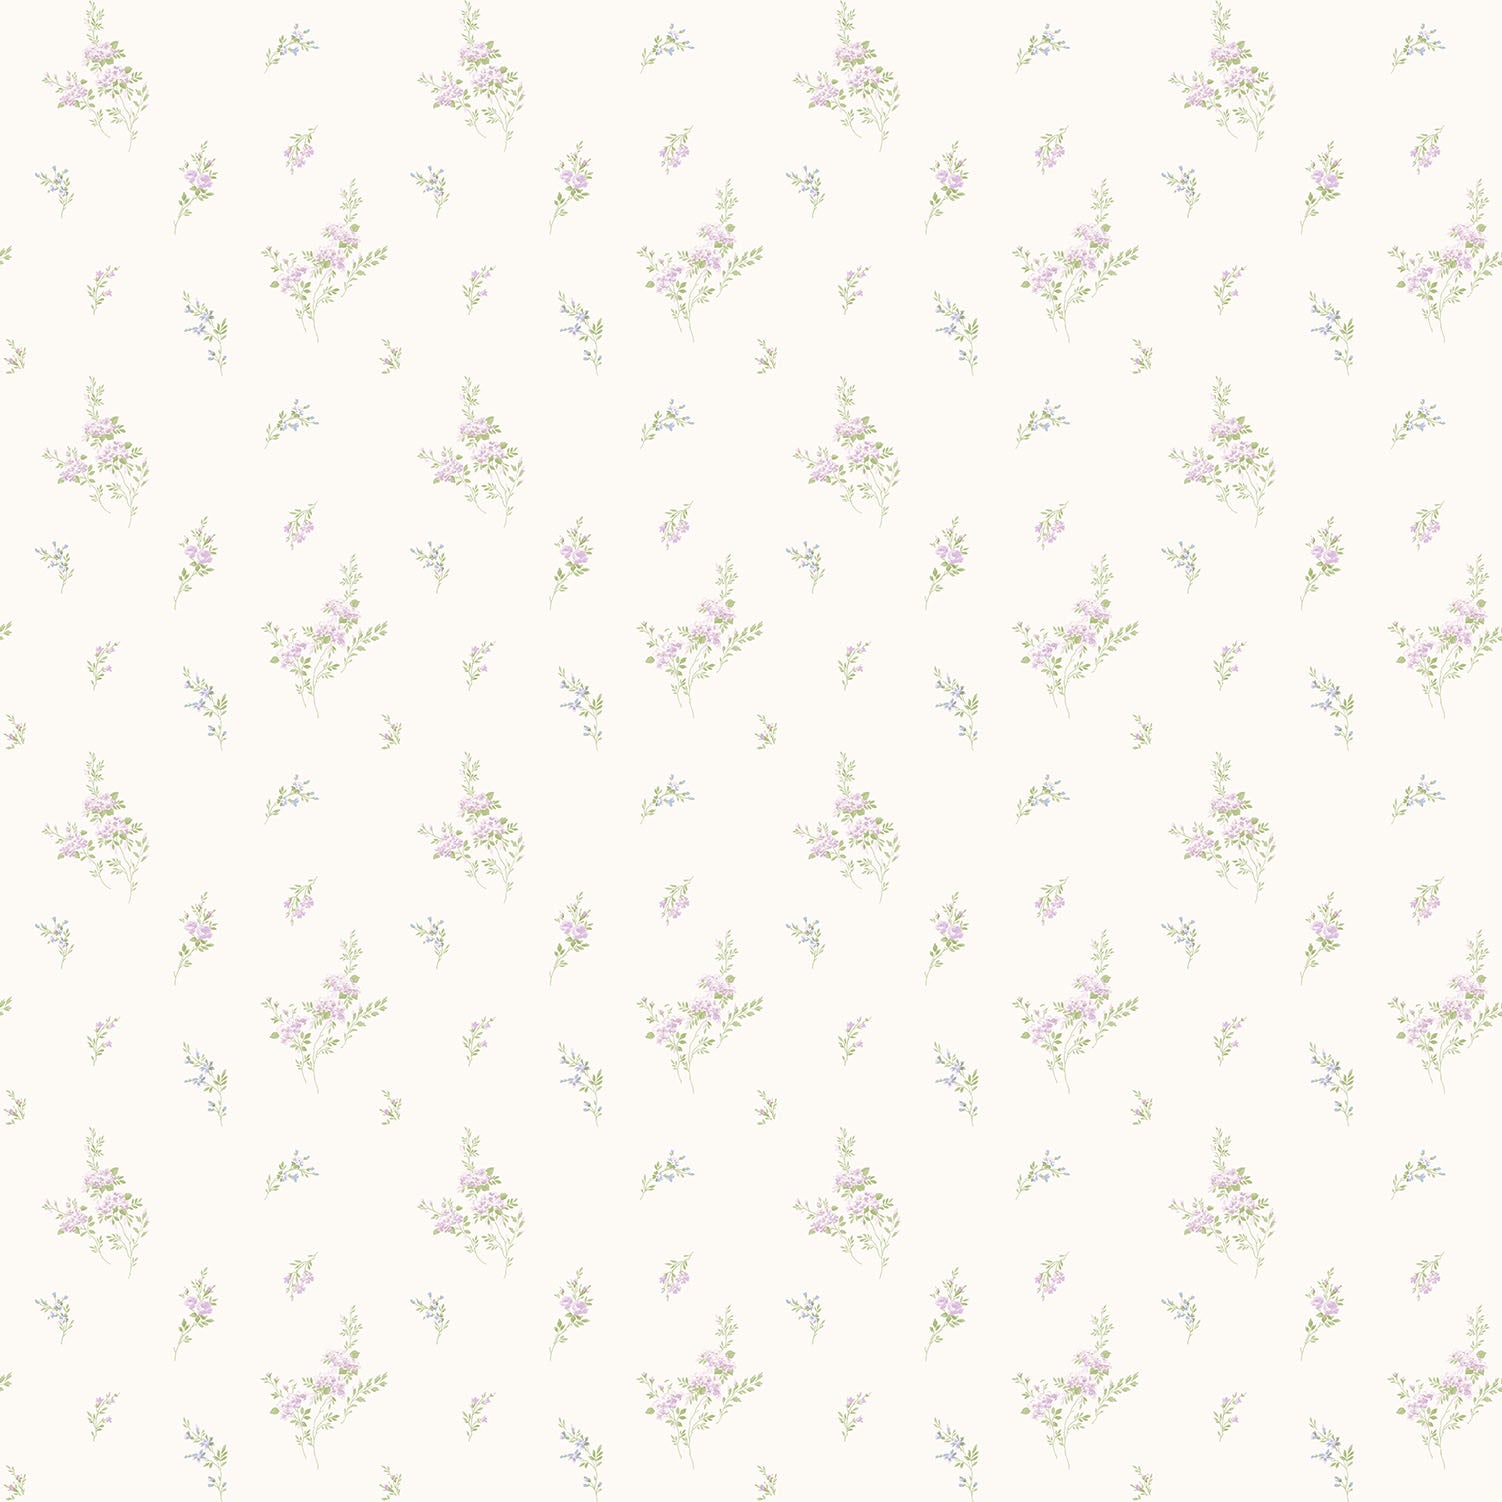 Sample Tiny Roses Lilac/Green Wallpaper from the Miniatures 2 Collecti ...